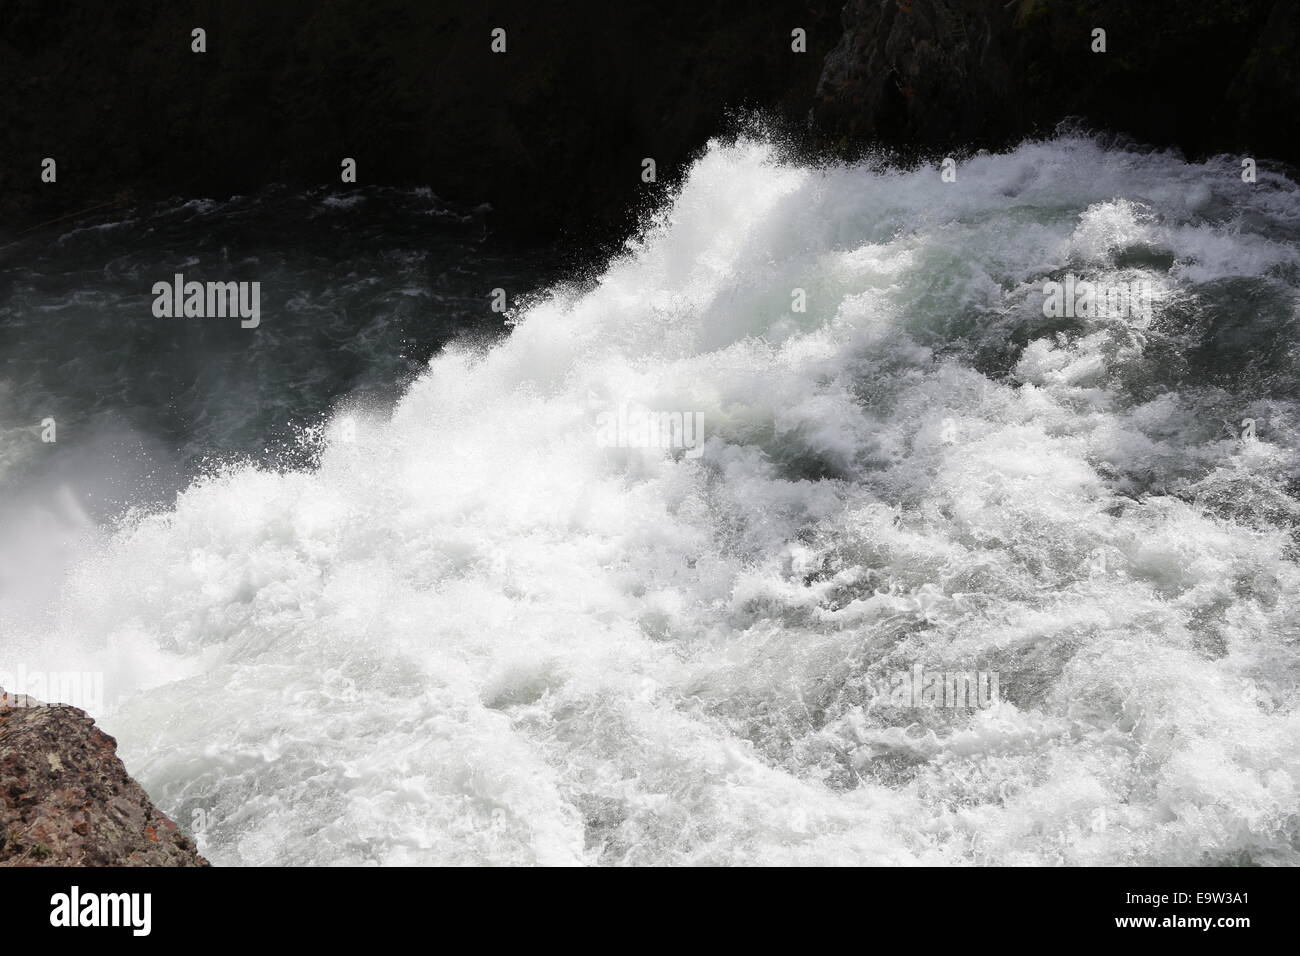 Wet, wild and dam free': Scenes from the Yellowstone River boat